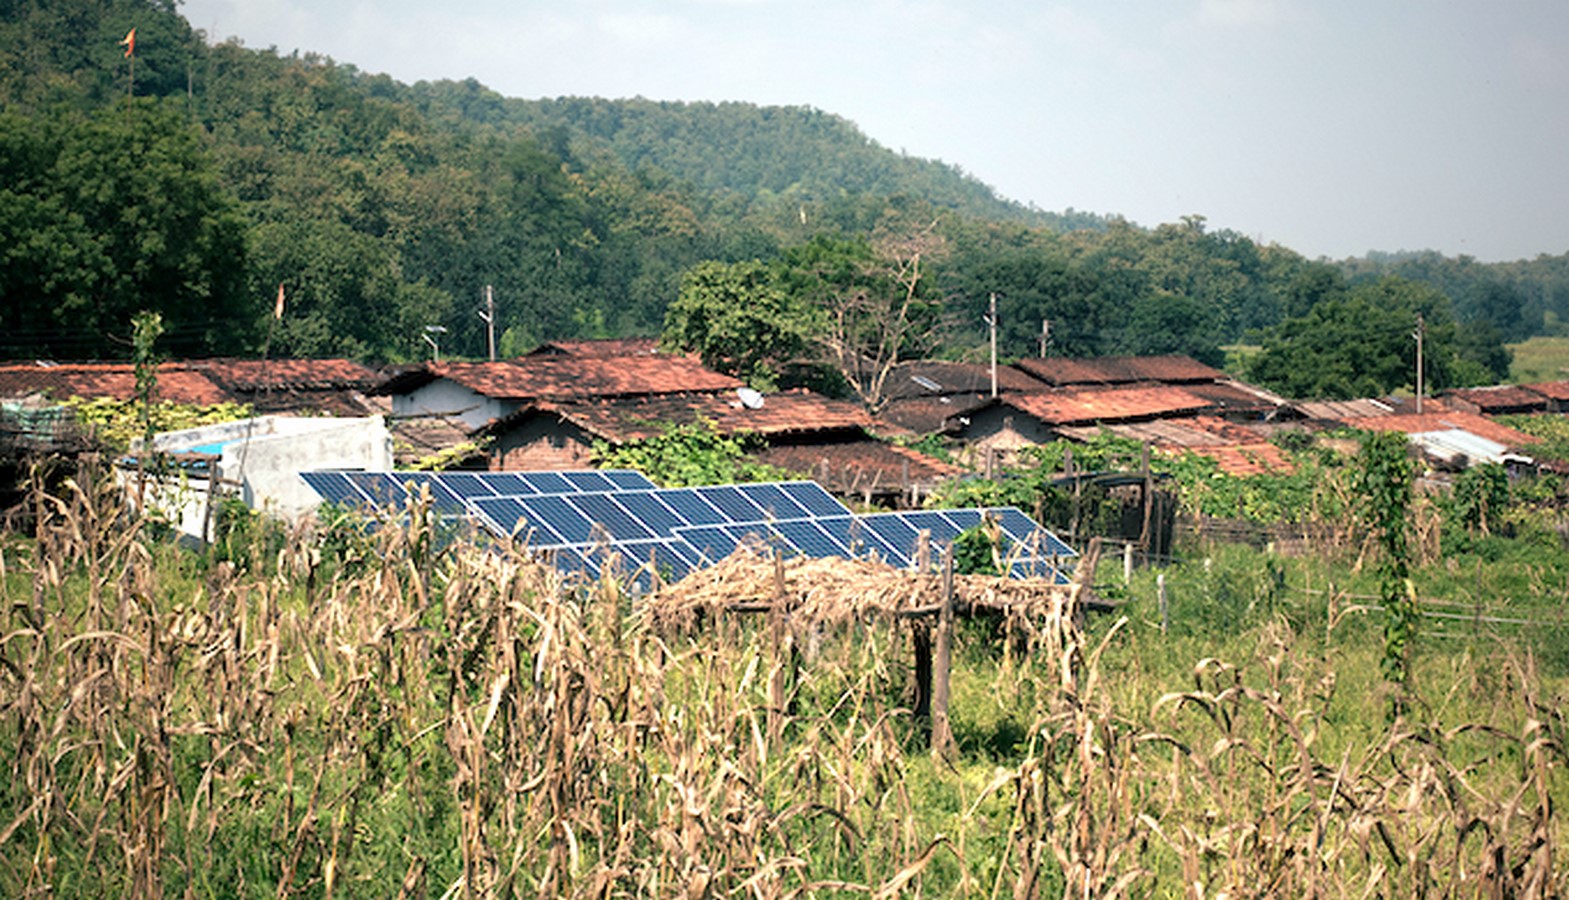 How are Indian villages working towards sustainability? - Sheet2